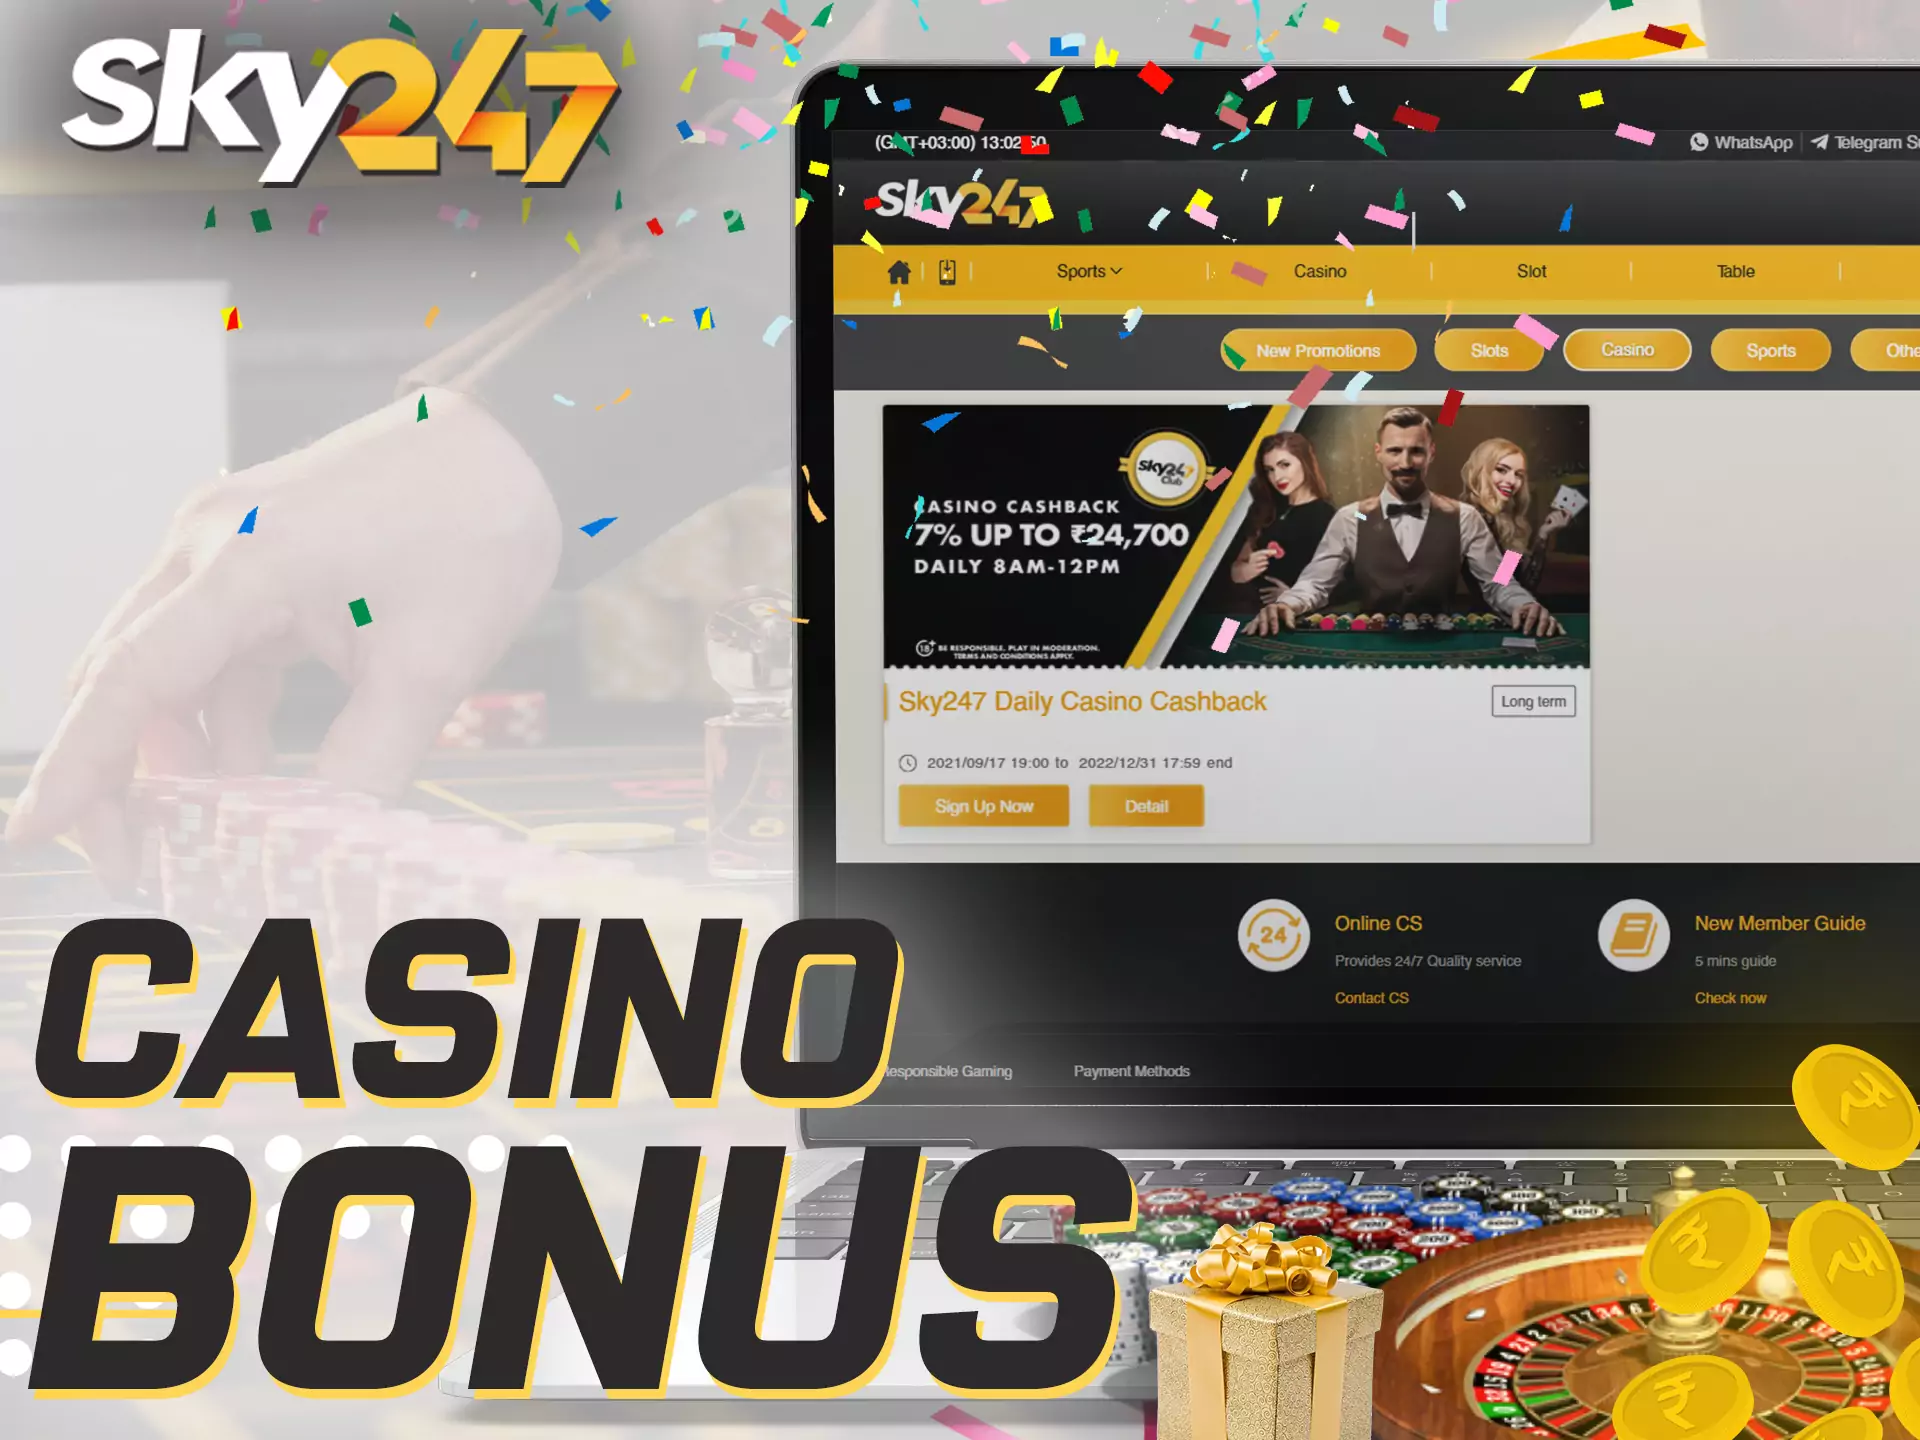 On Sky247, you can get a special bonus for playing casino games.